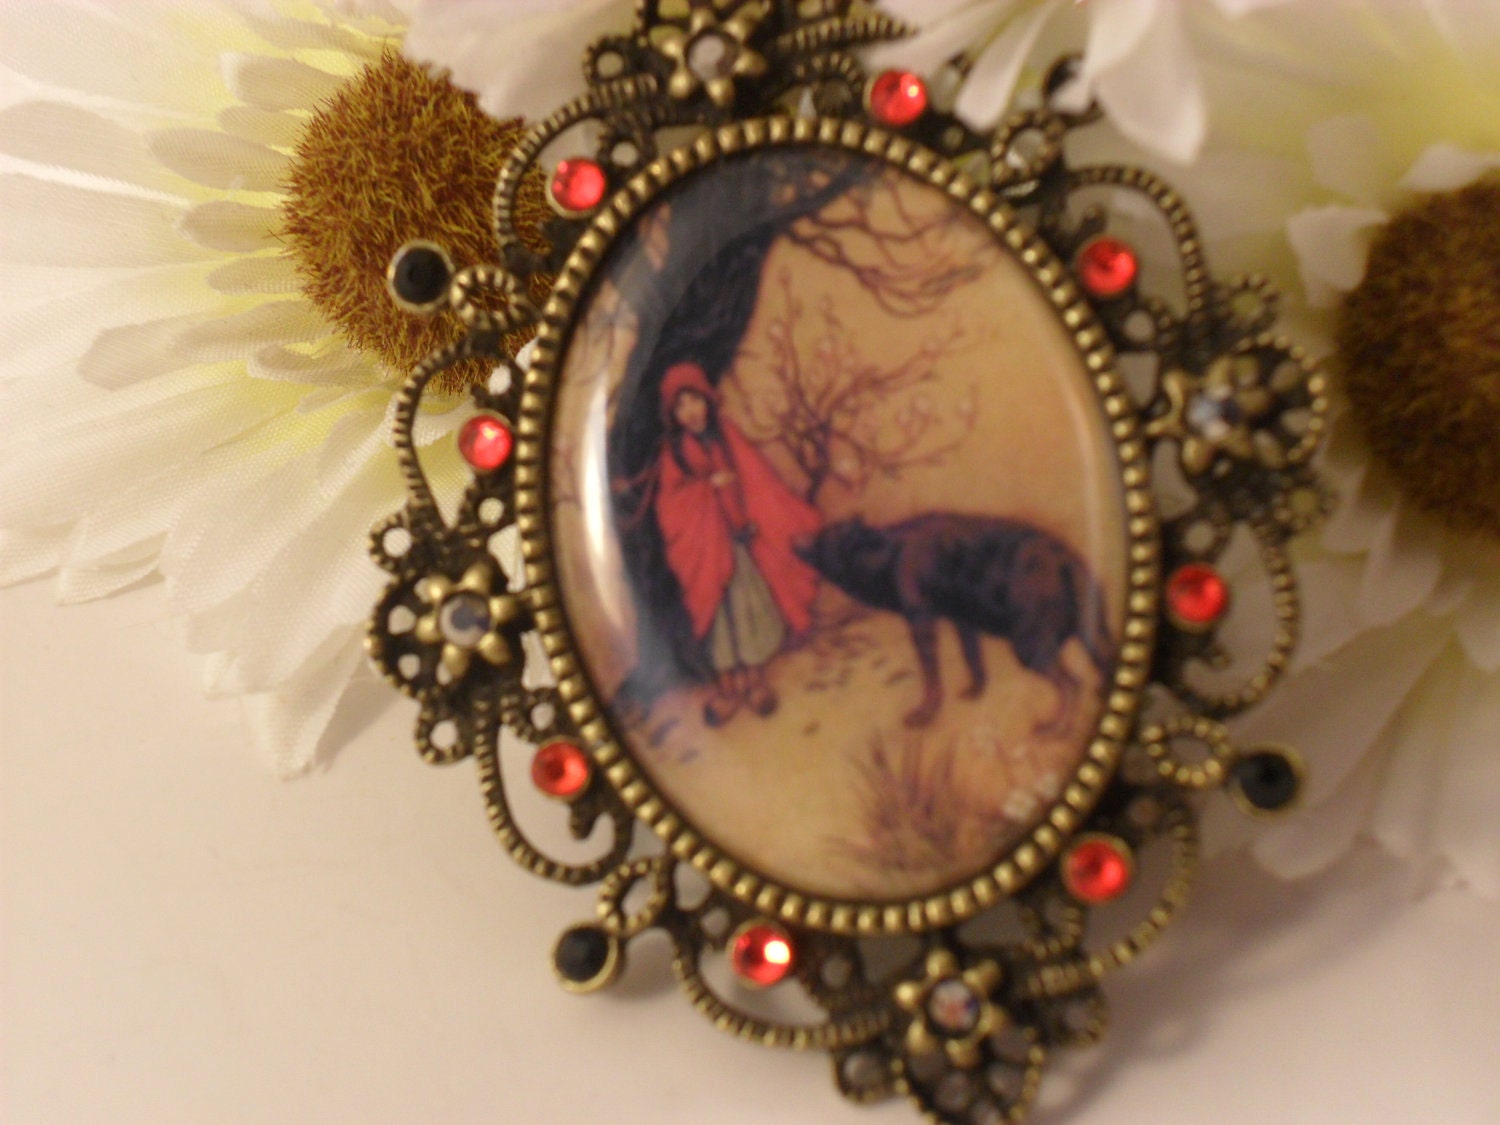 Little Red Riding Hood Cameo Necklace